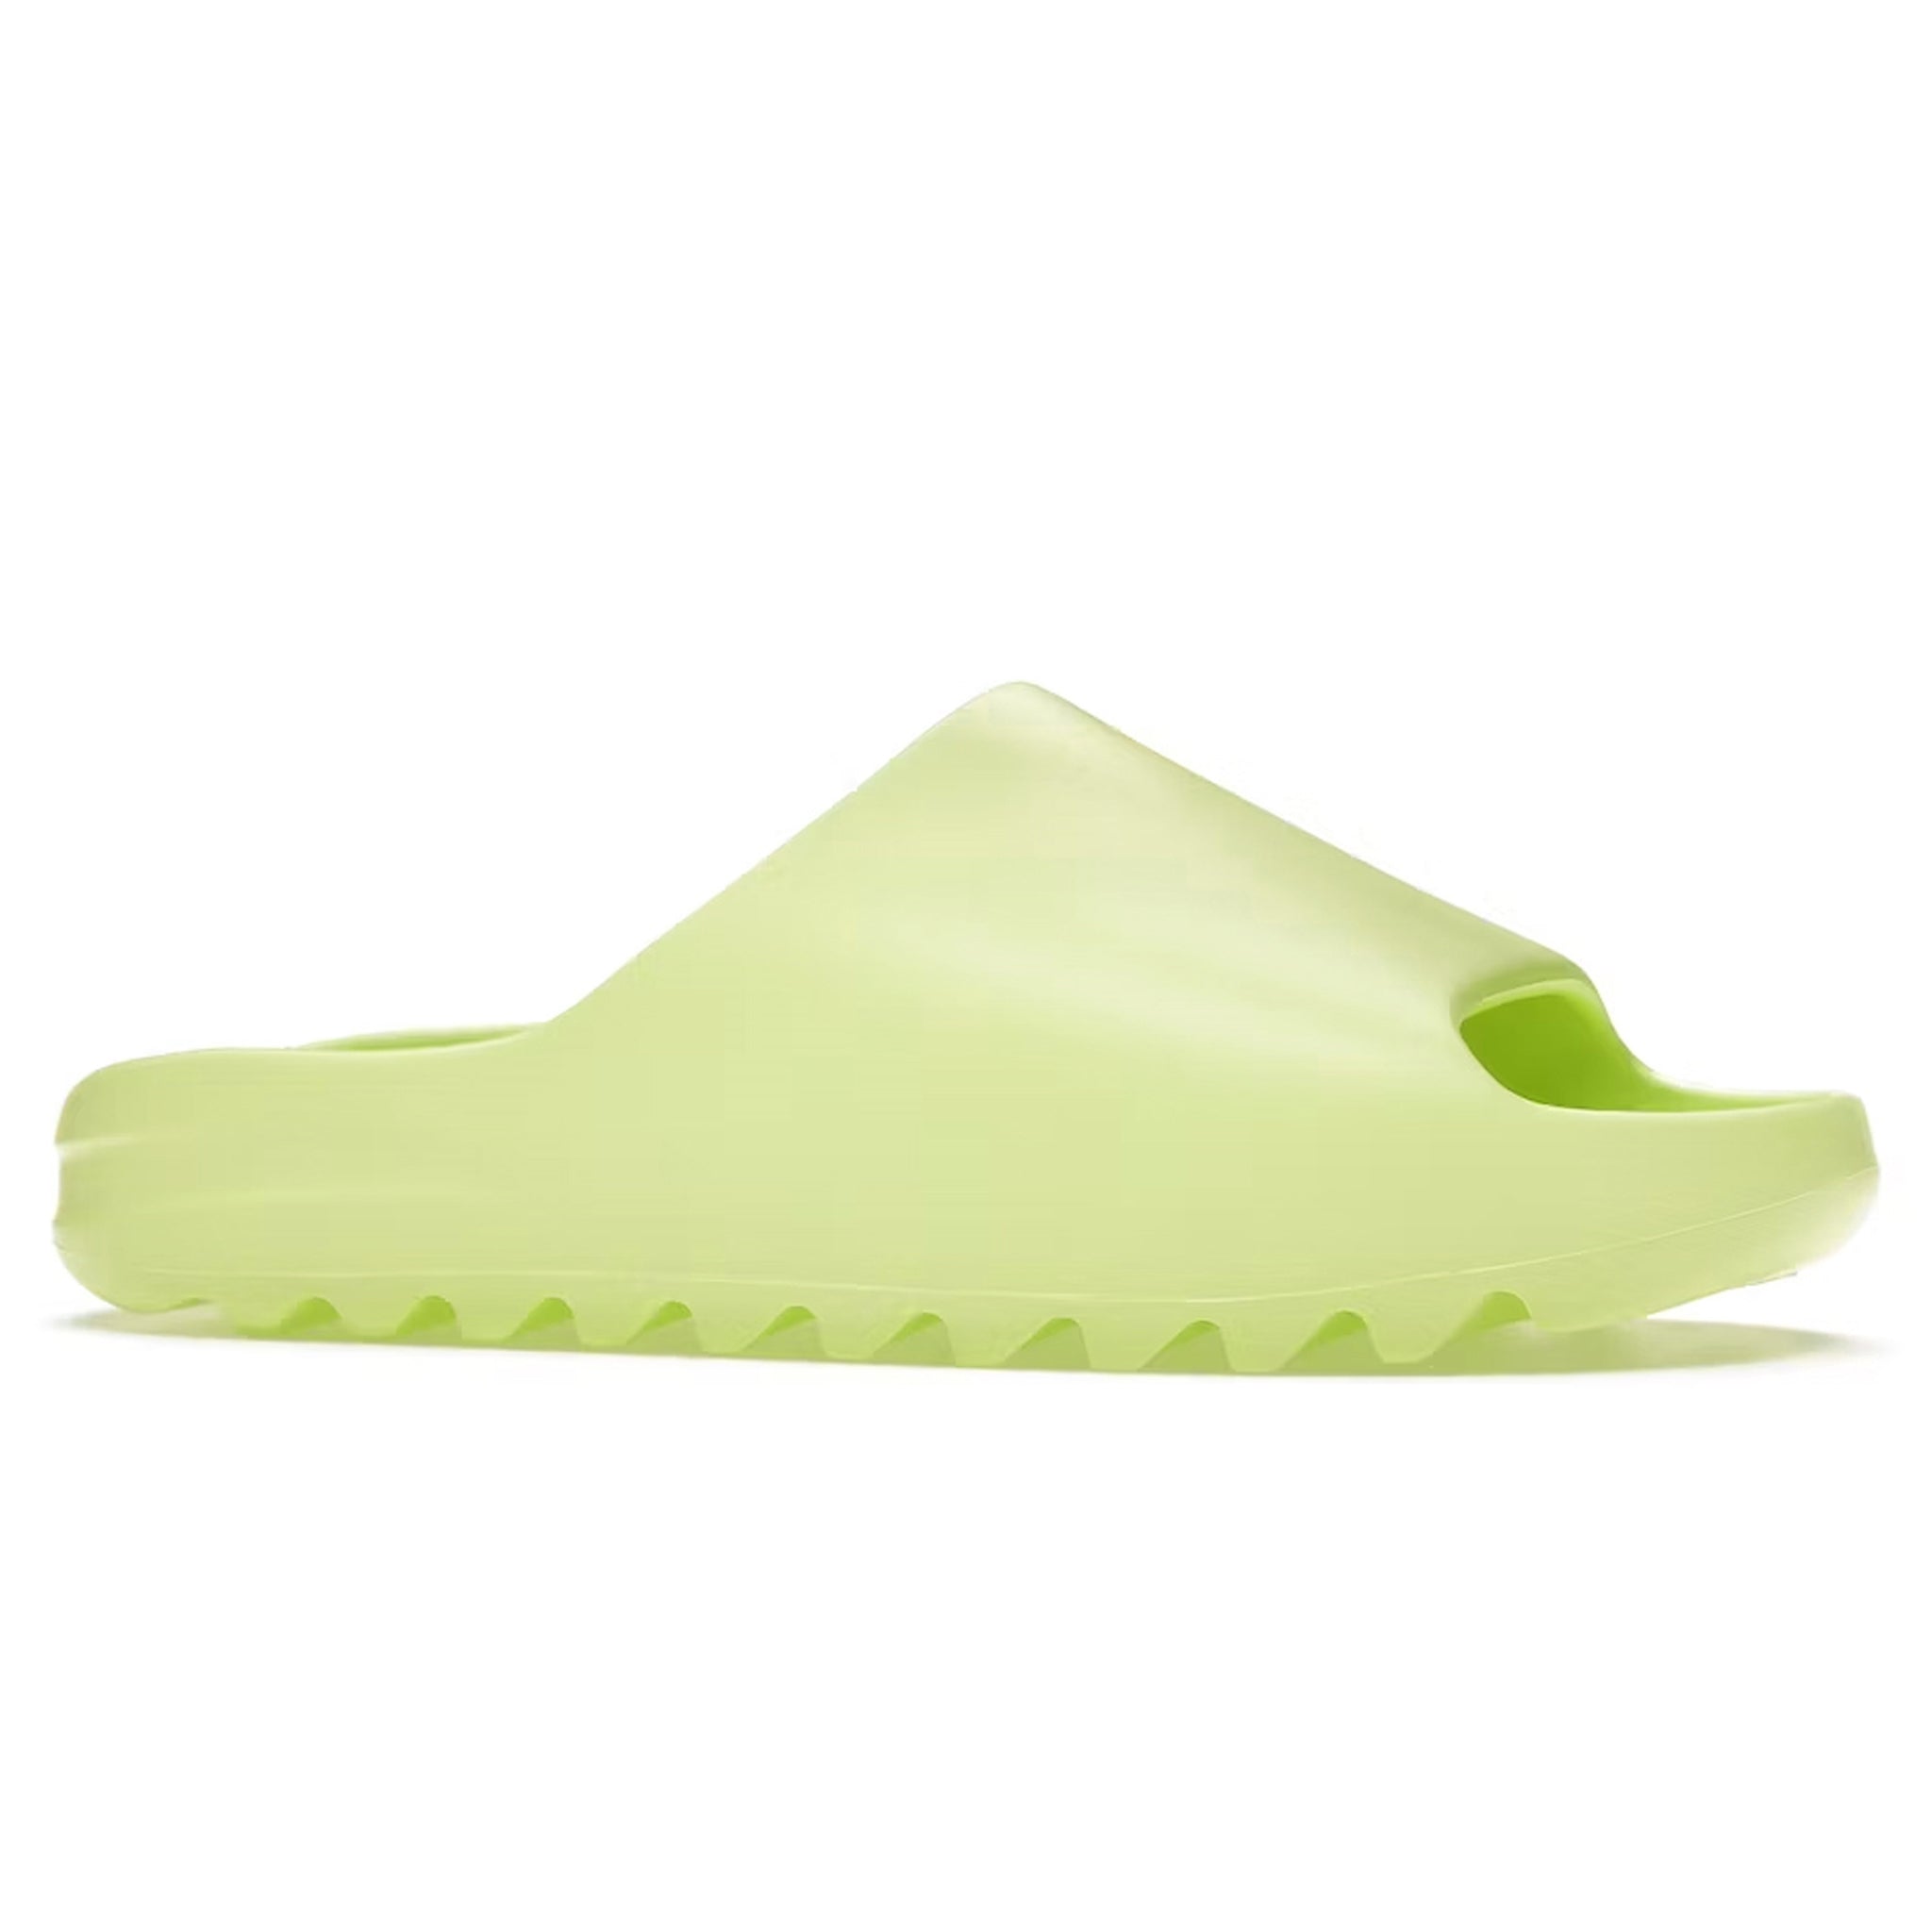 Front view of Adidas Yeezy Slide Glow Green GX6138